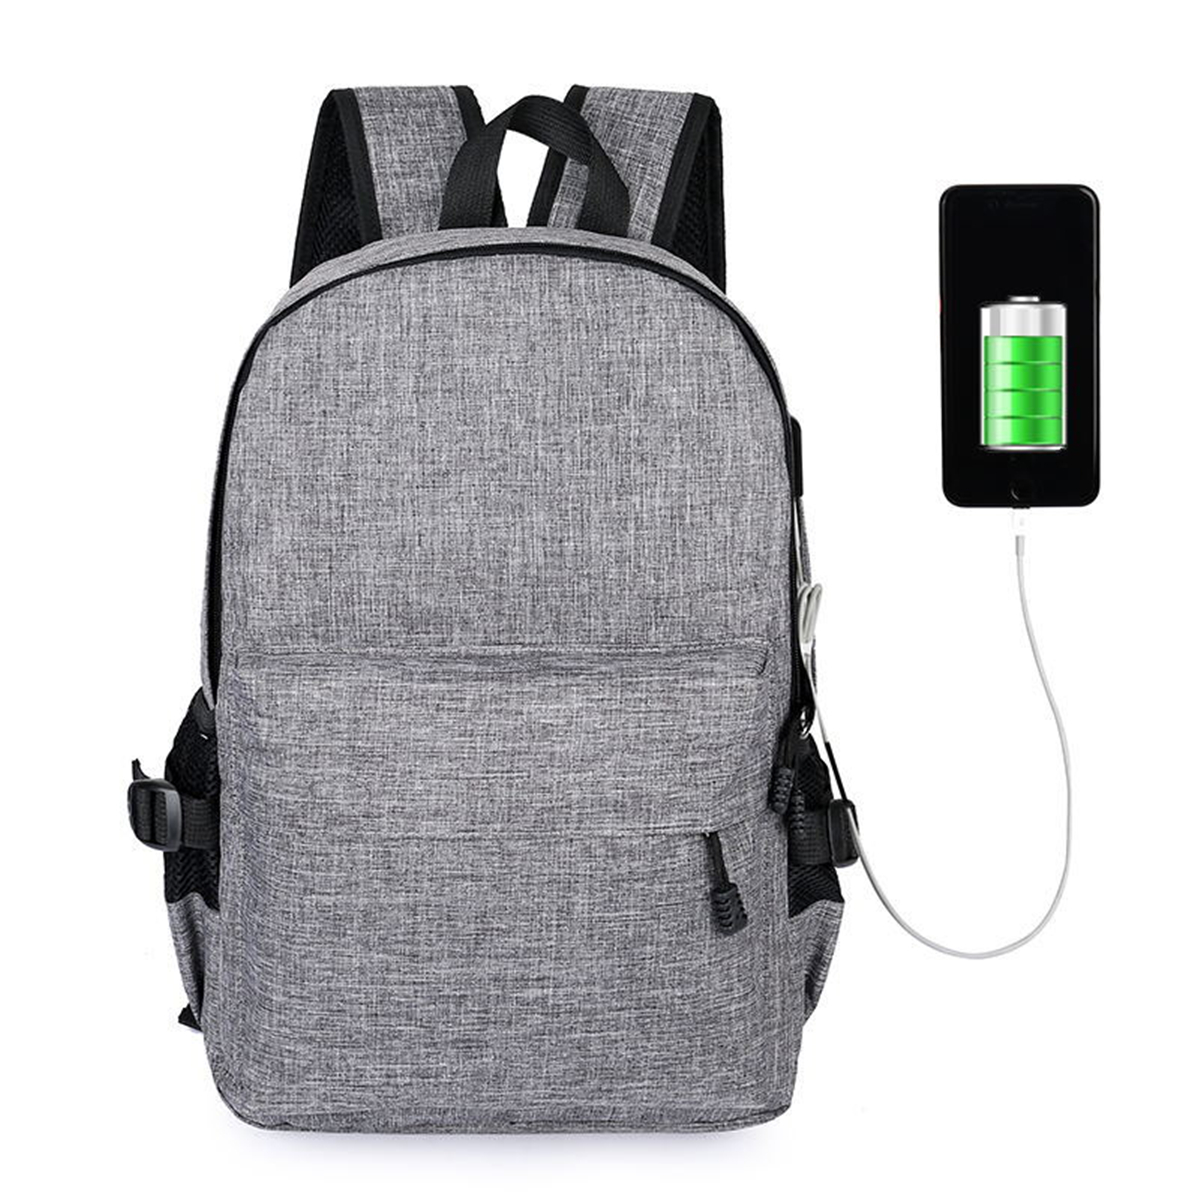 Black Lives Matter 2020 Classic Black Canvas Backpack is Suitable for Students to Travel to School Ustice for Jacob Blake